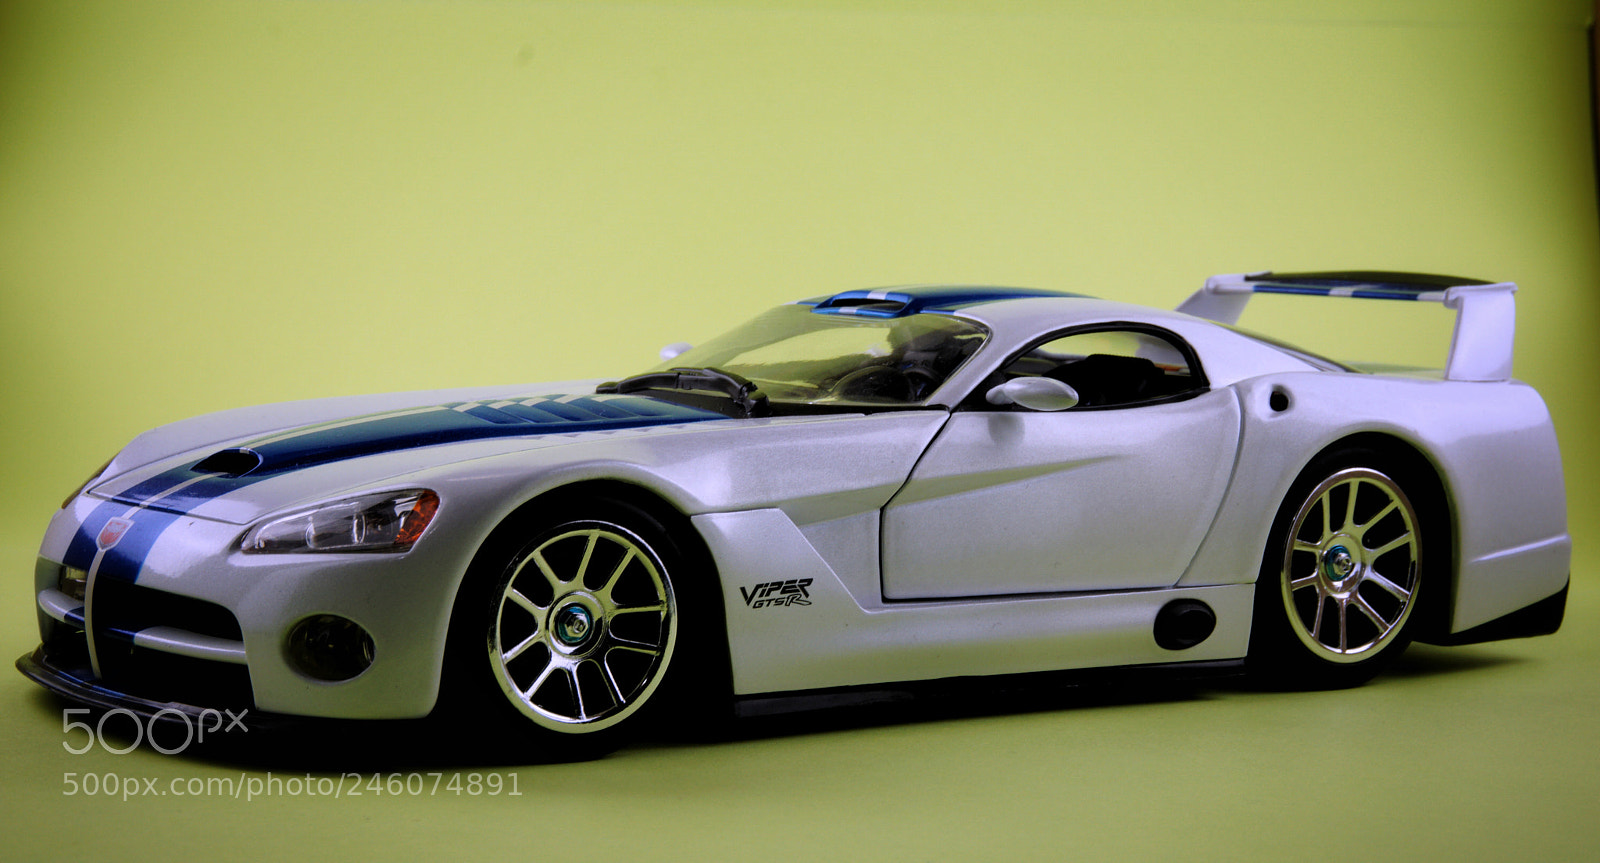 Sony a6000 sample photo. Die cast 1/18 scale viper photography